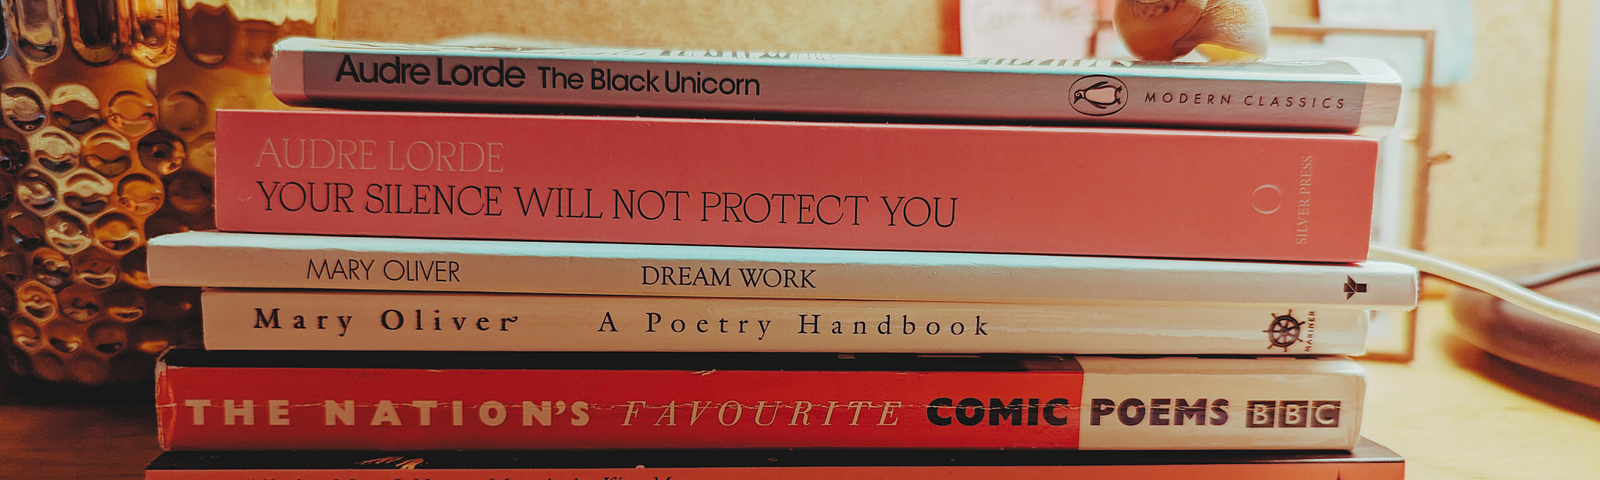 A stack of books on a desk. From bottom to top: The English Summer; All the Ment I Never Married; The Nation’s Favourite Comic Poems; A Poetry Handbook; Dream Work; Your Silence Will Not Protect You; The Black Unicorn